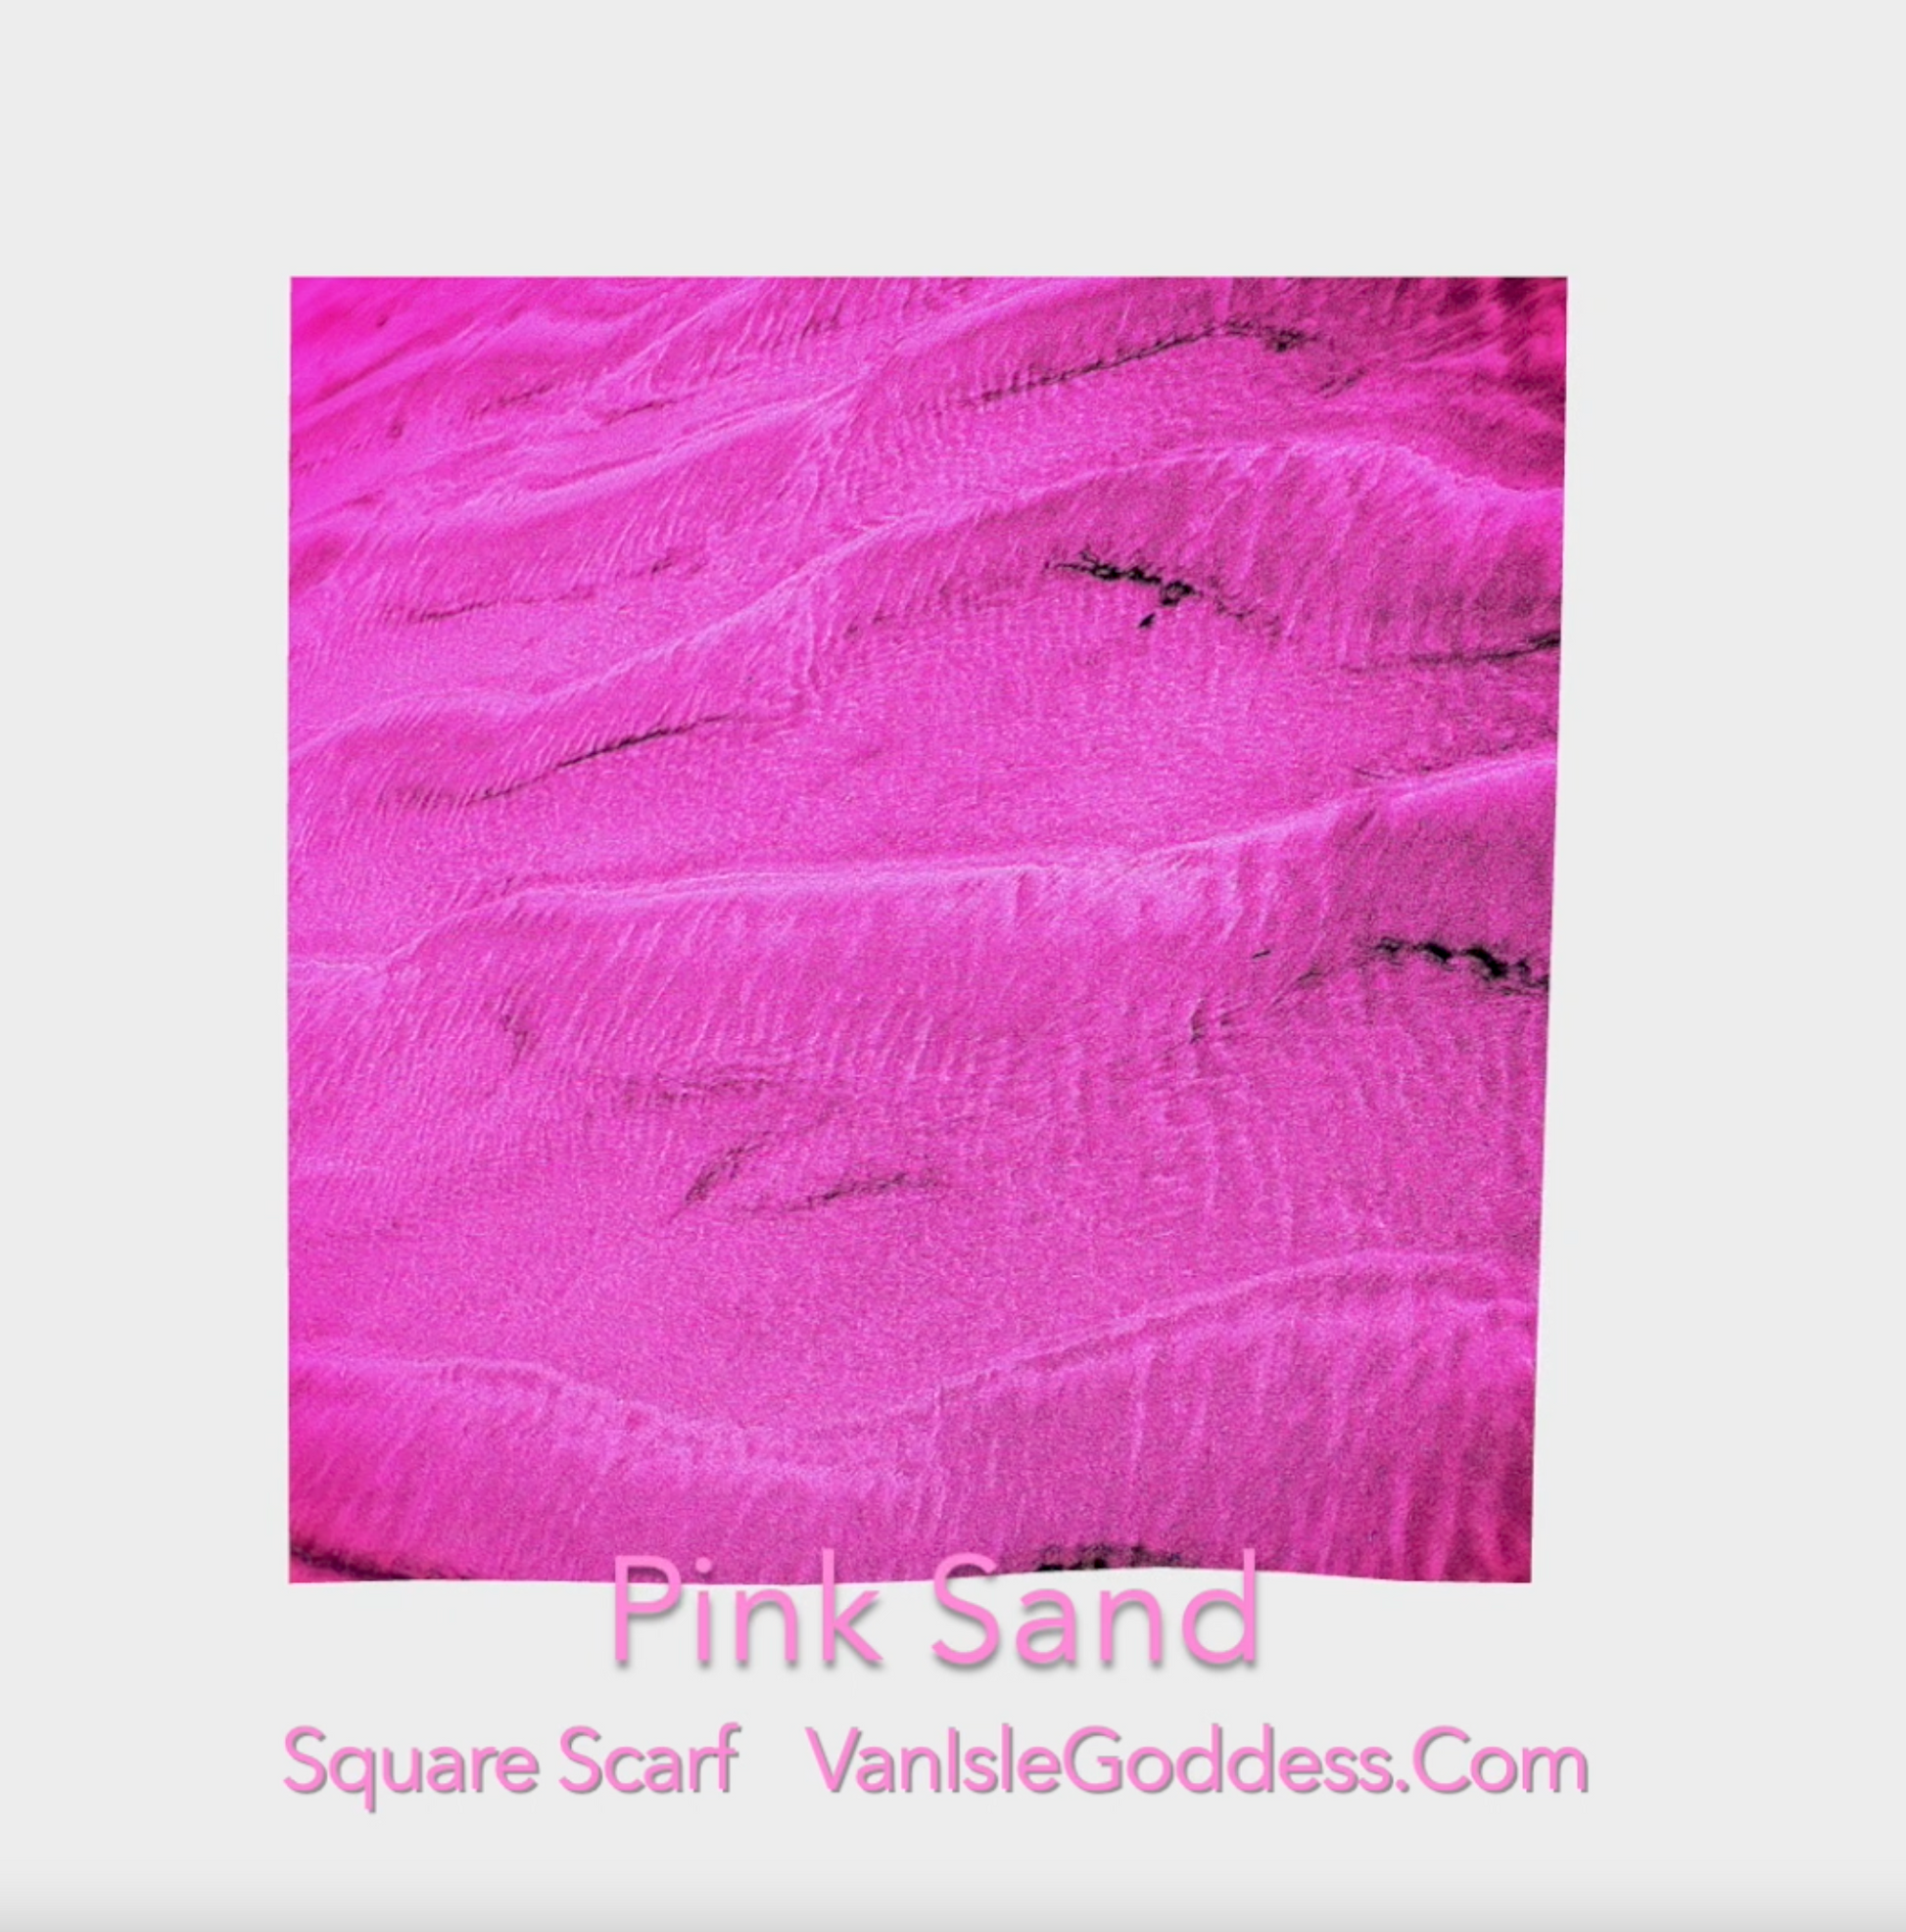 Pink Sand Square scarf shown full size